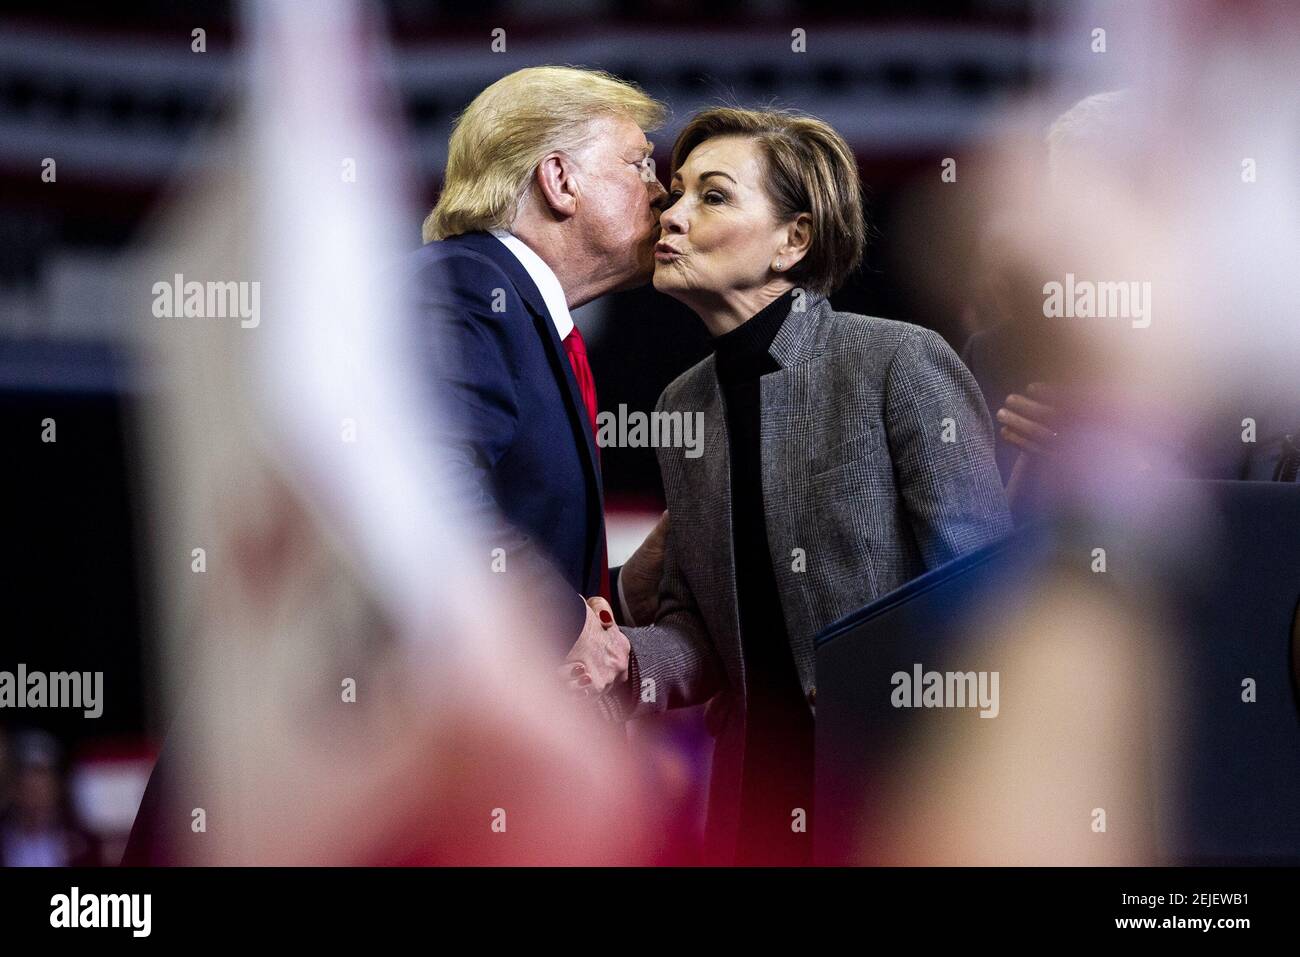 Jan 30, 2020; Des Moines, IA, USA; Iowa governor Kim Reynolds kisses the  cheek of President Donald Trump after he called her up on stage during a  campaign rally on Thursday, Jan.